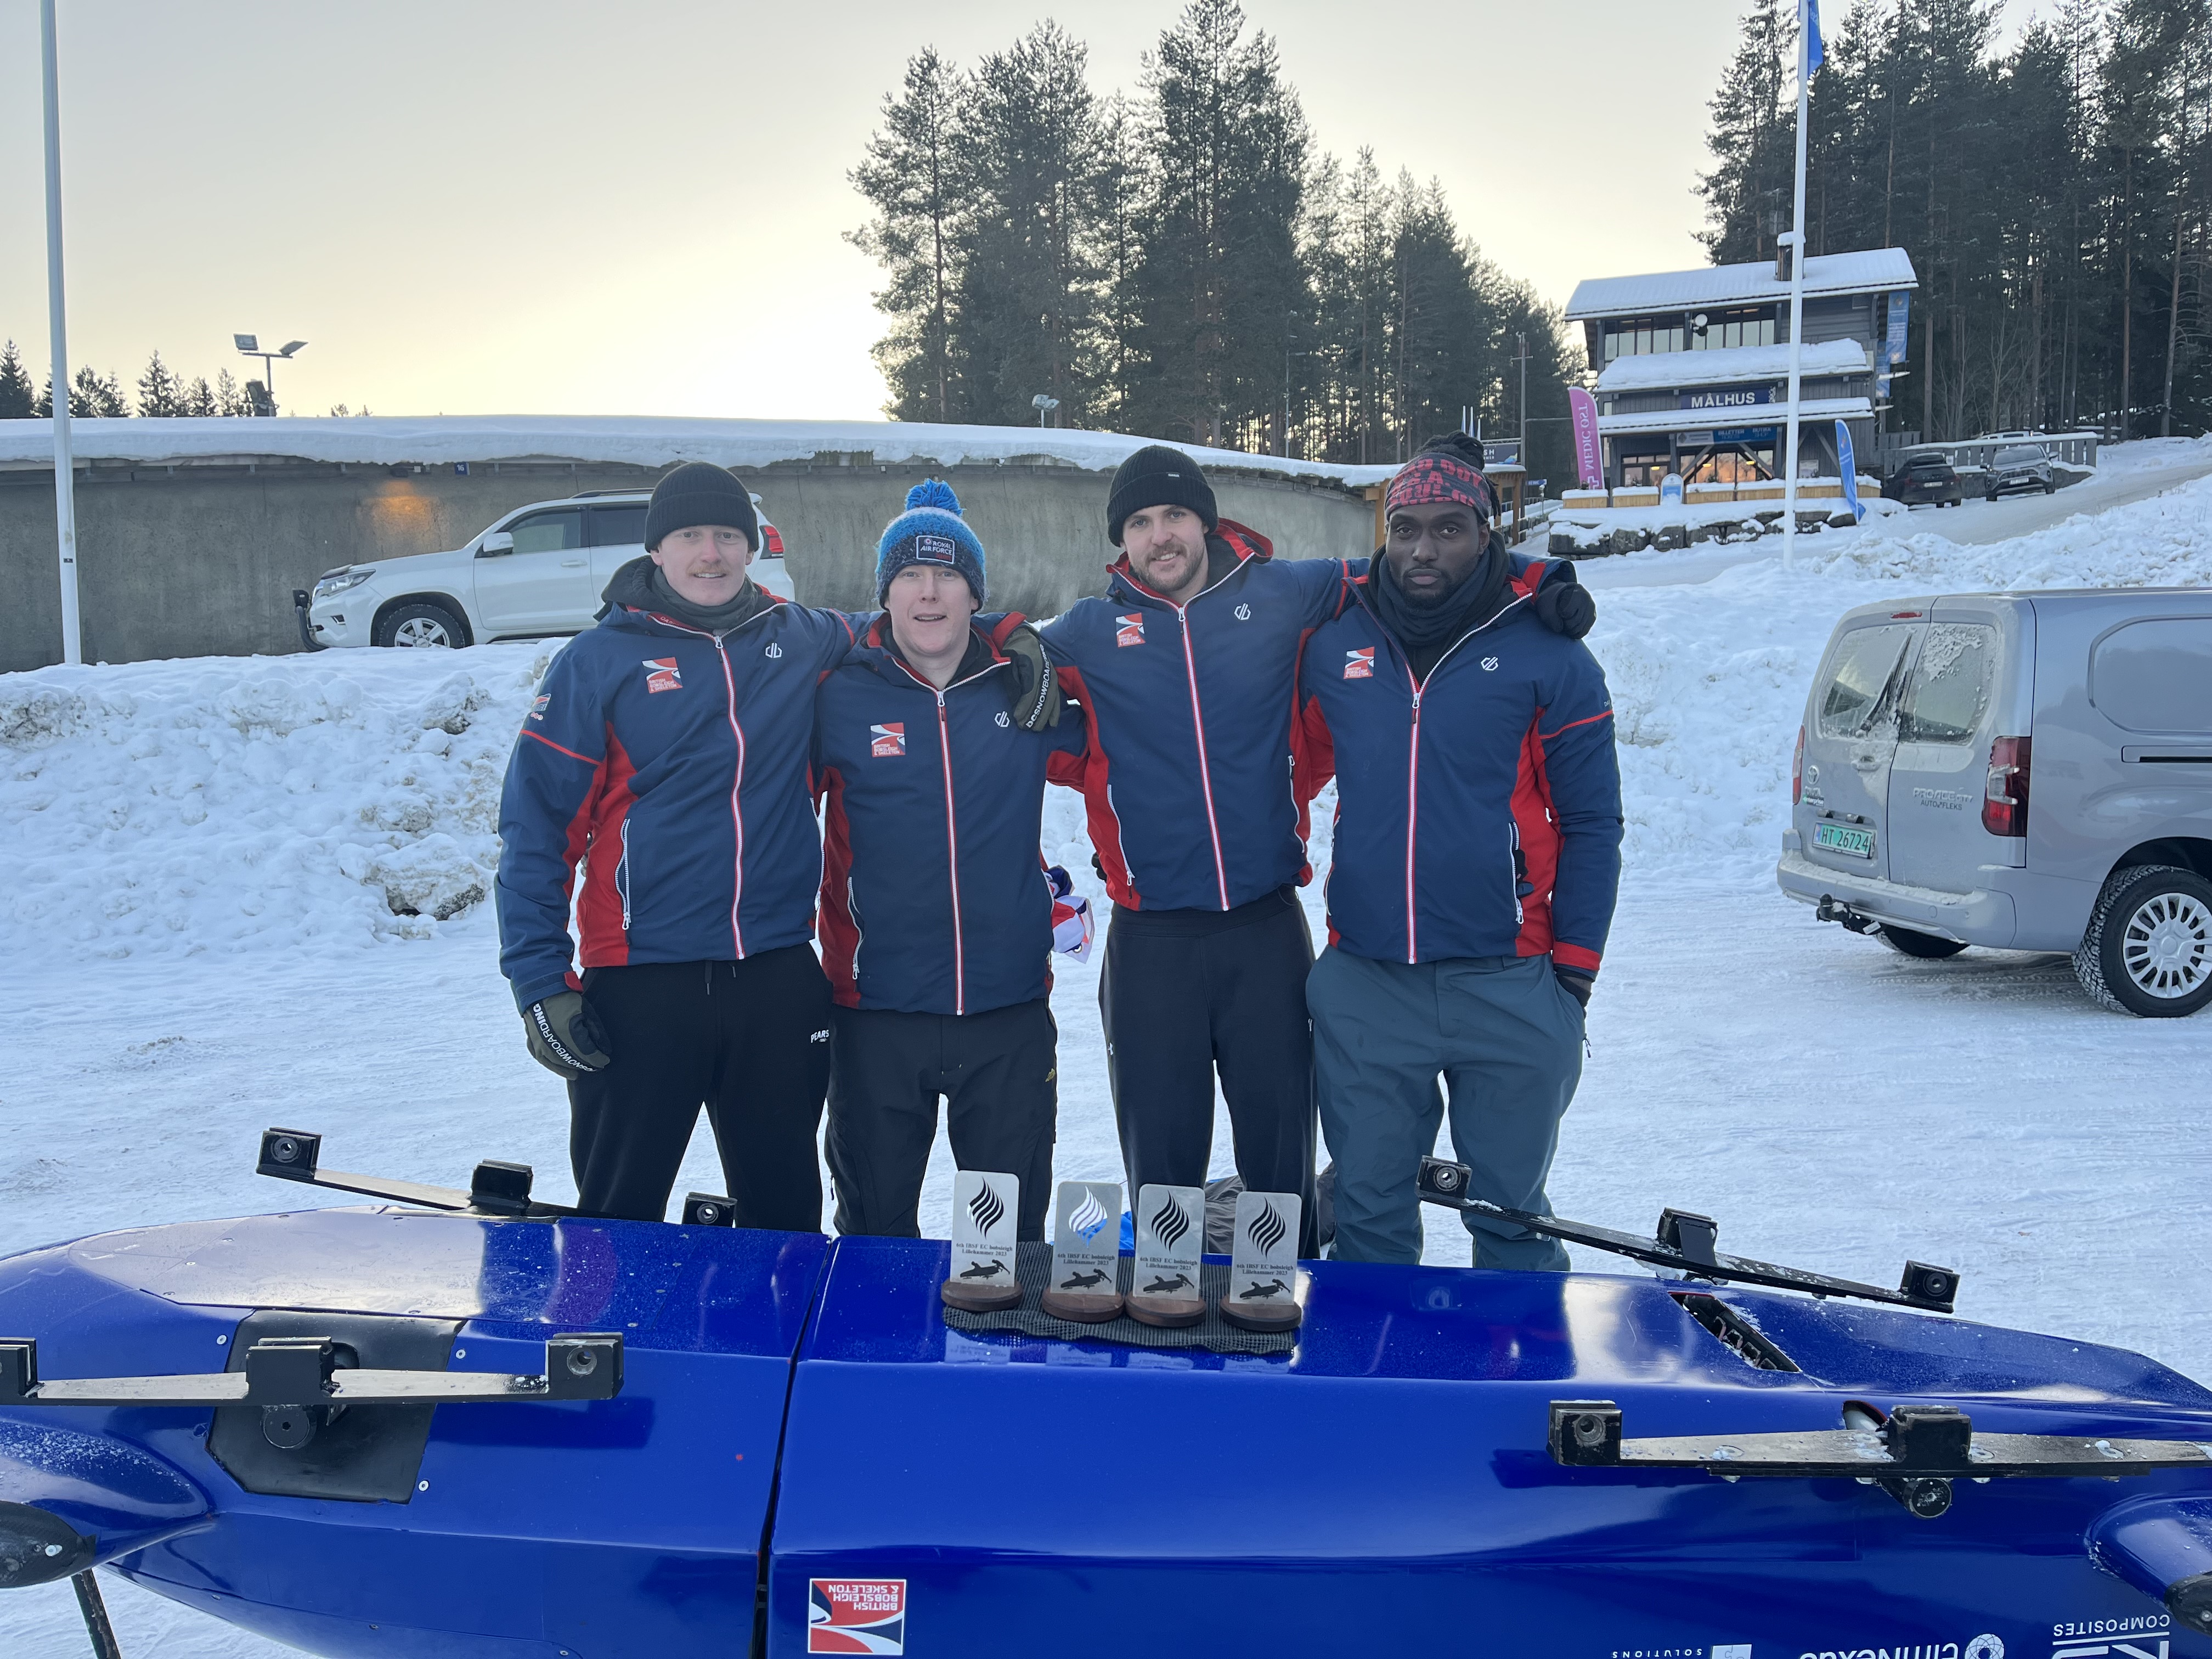 Bobsleigh 4-man team with trophies